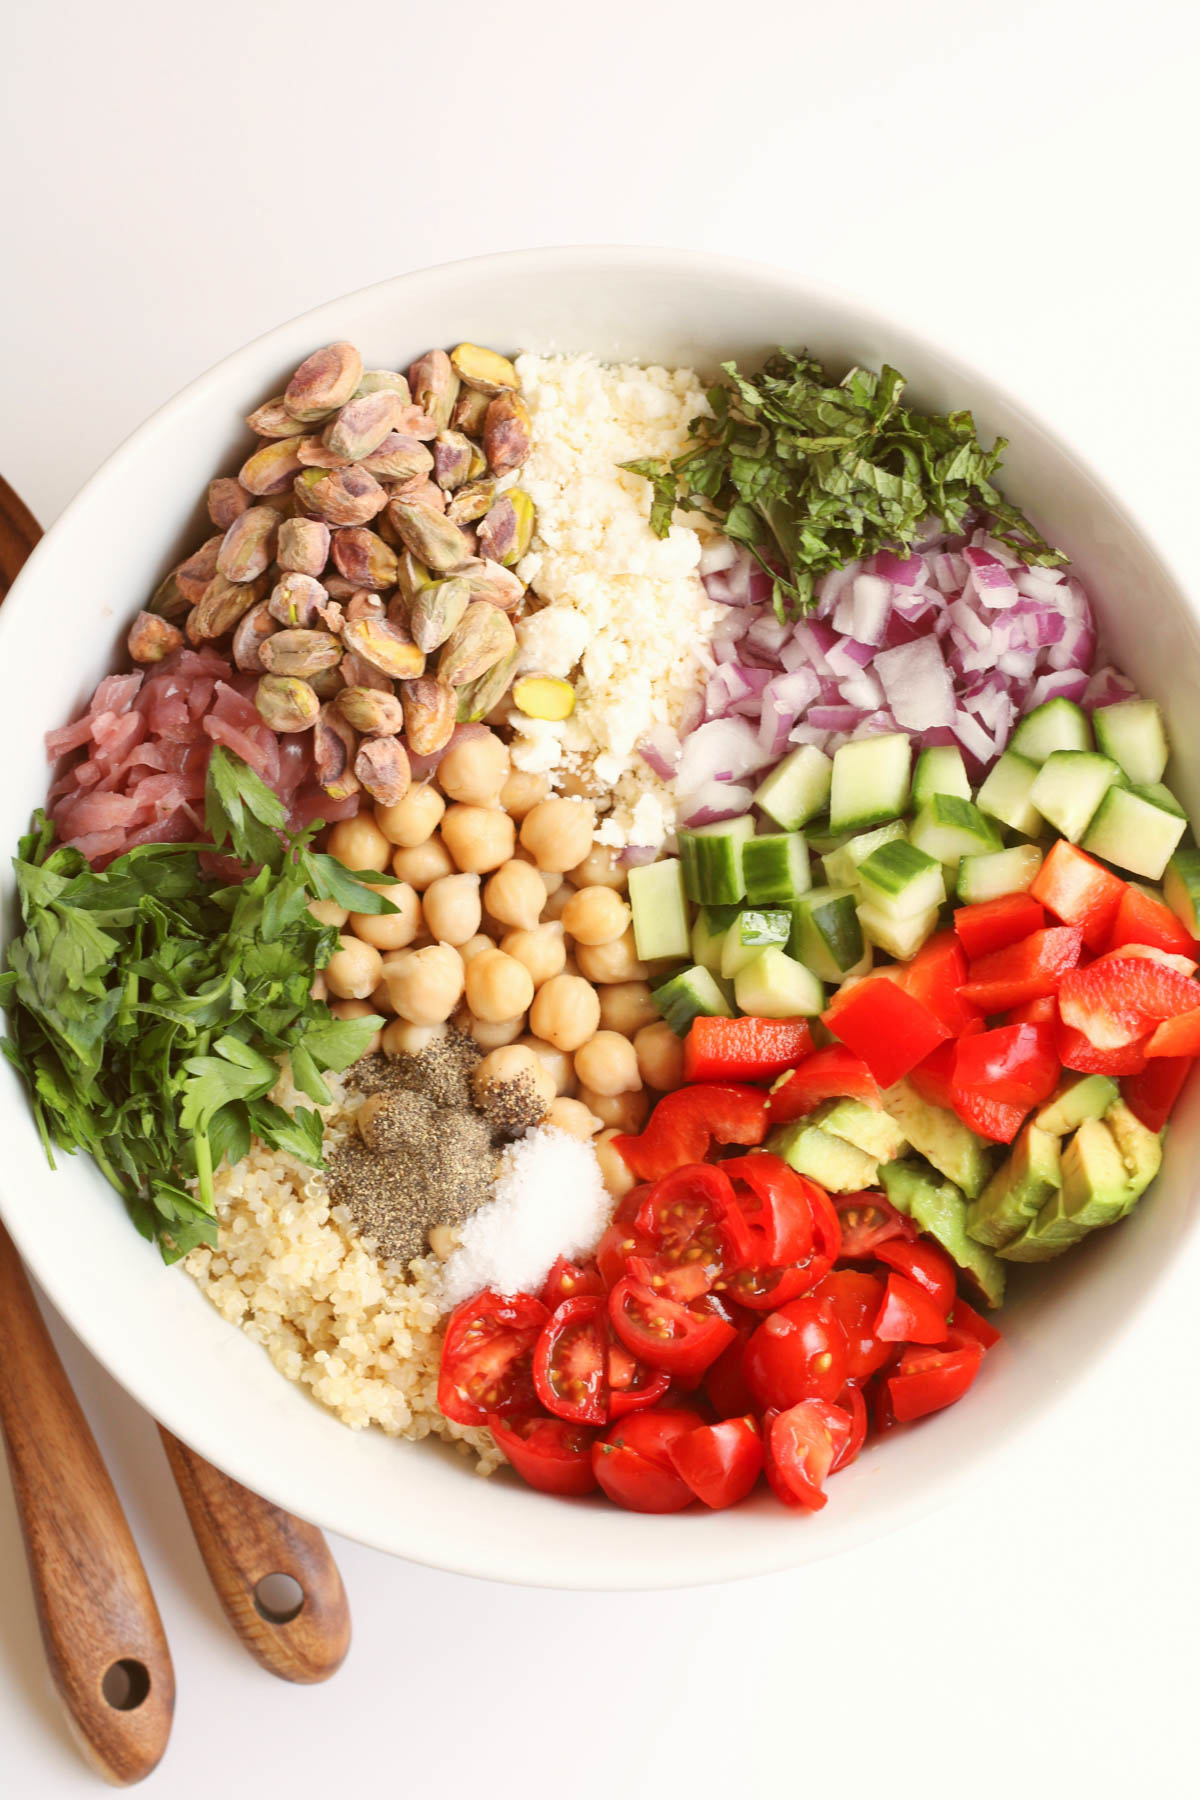 Overhead image of a white bowl containing prepared ingredients for a quinoa salad. 